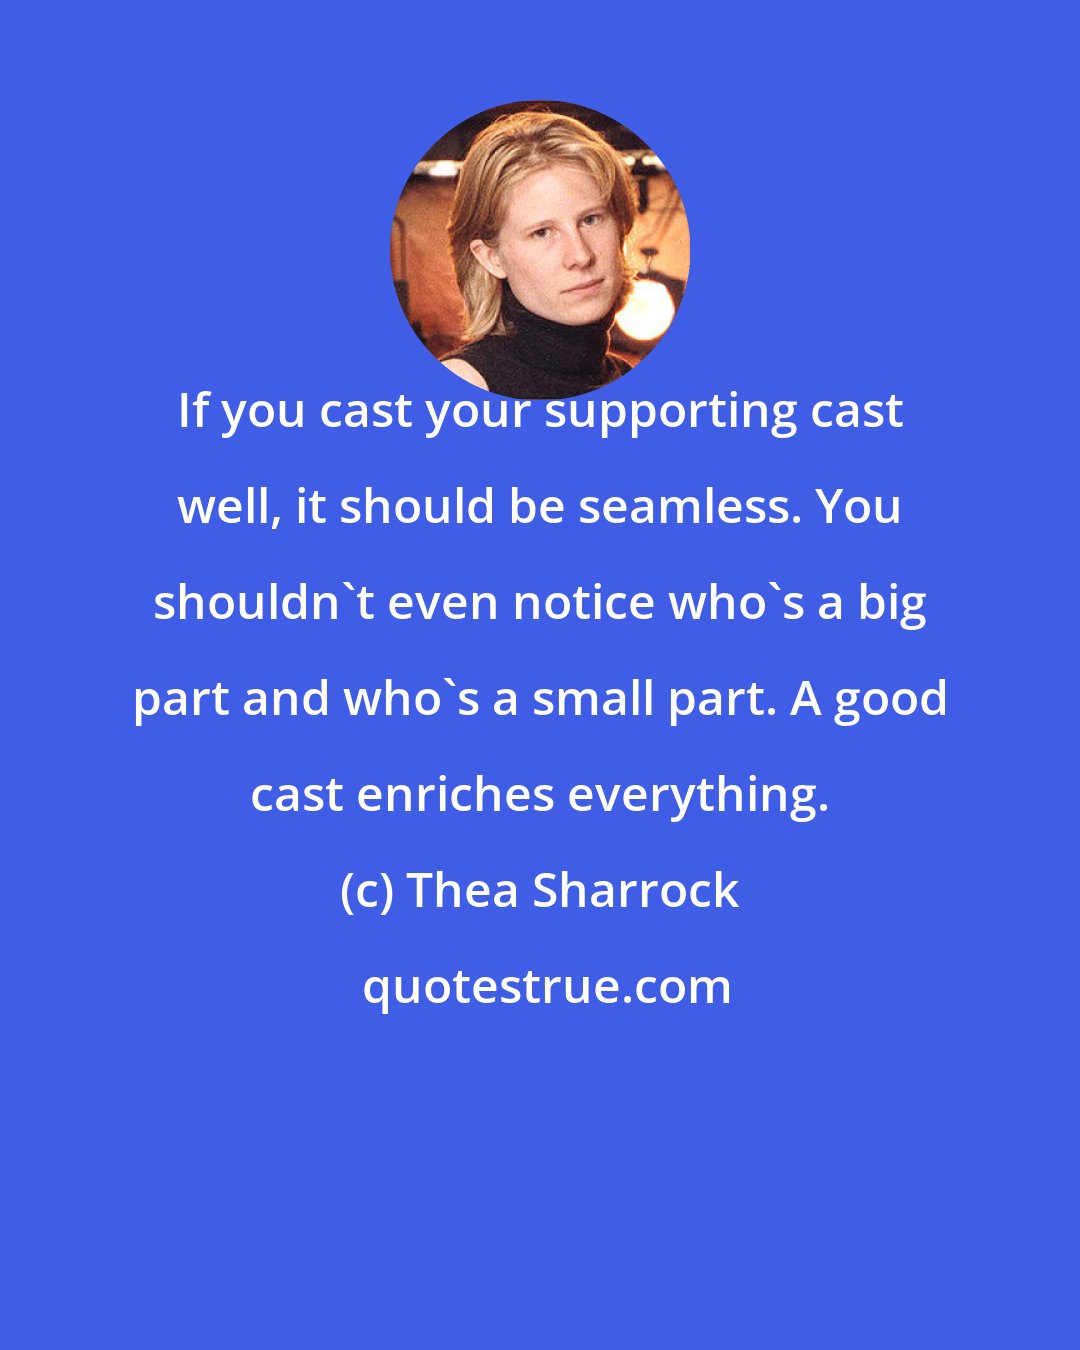 Thea Sharrock: If you cast your supporting cast well, it should be seamless. You shouldn't even notice who's a big part and who's a small part. A good cast enriches everything.